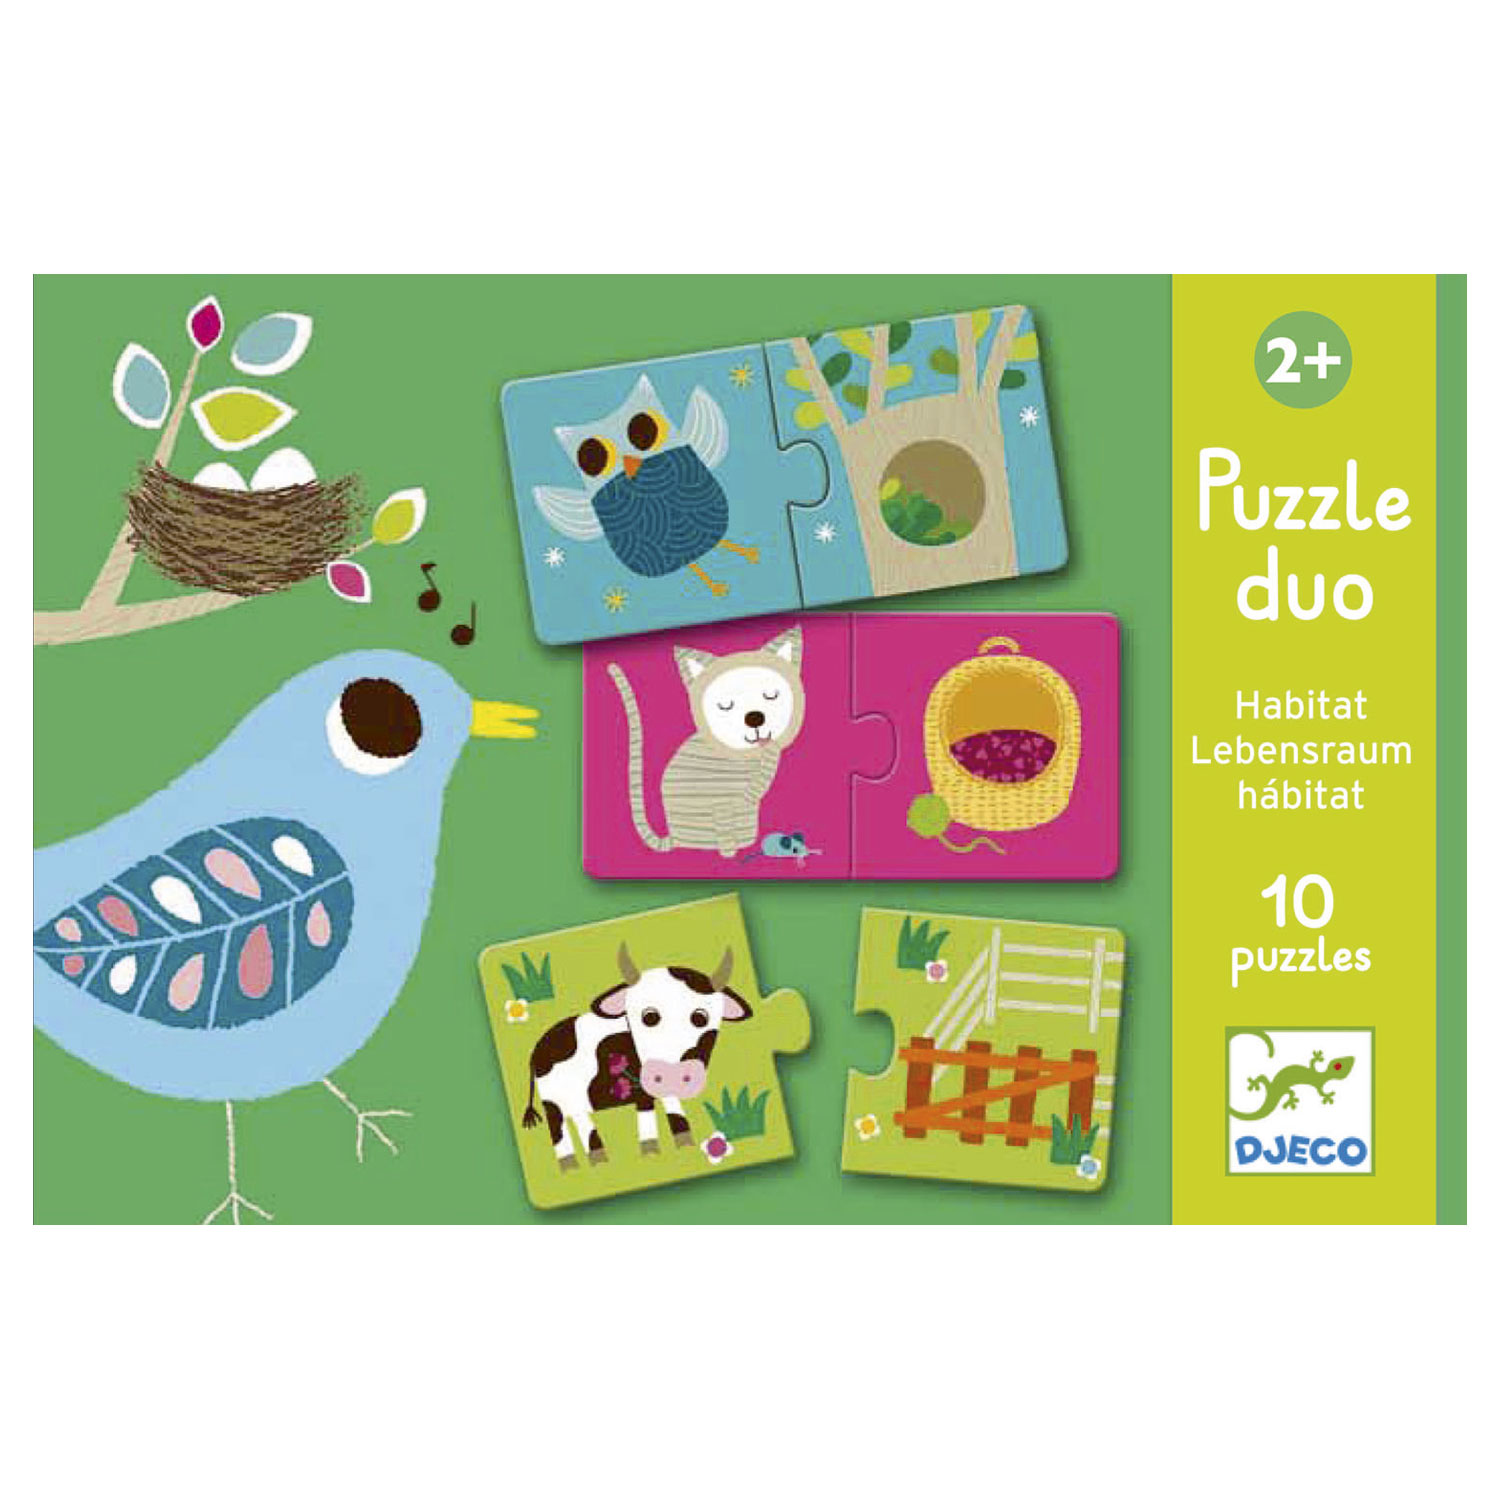 Djeco Puzzle Duo Wohnbereich, 20 Teile.